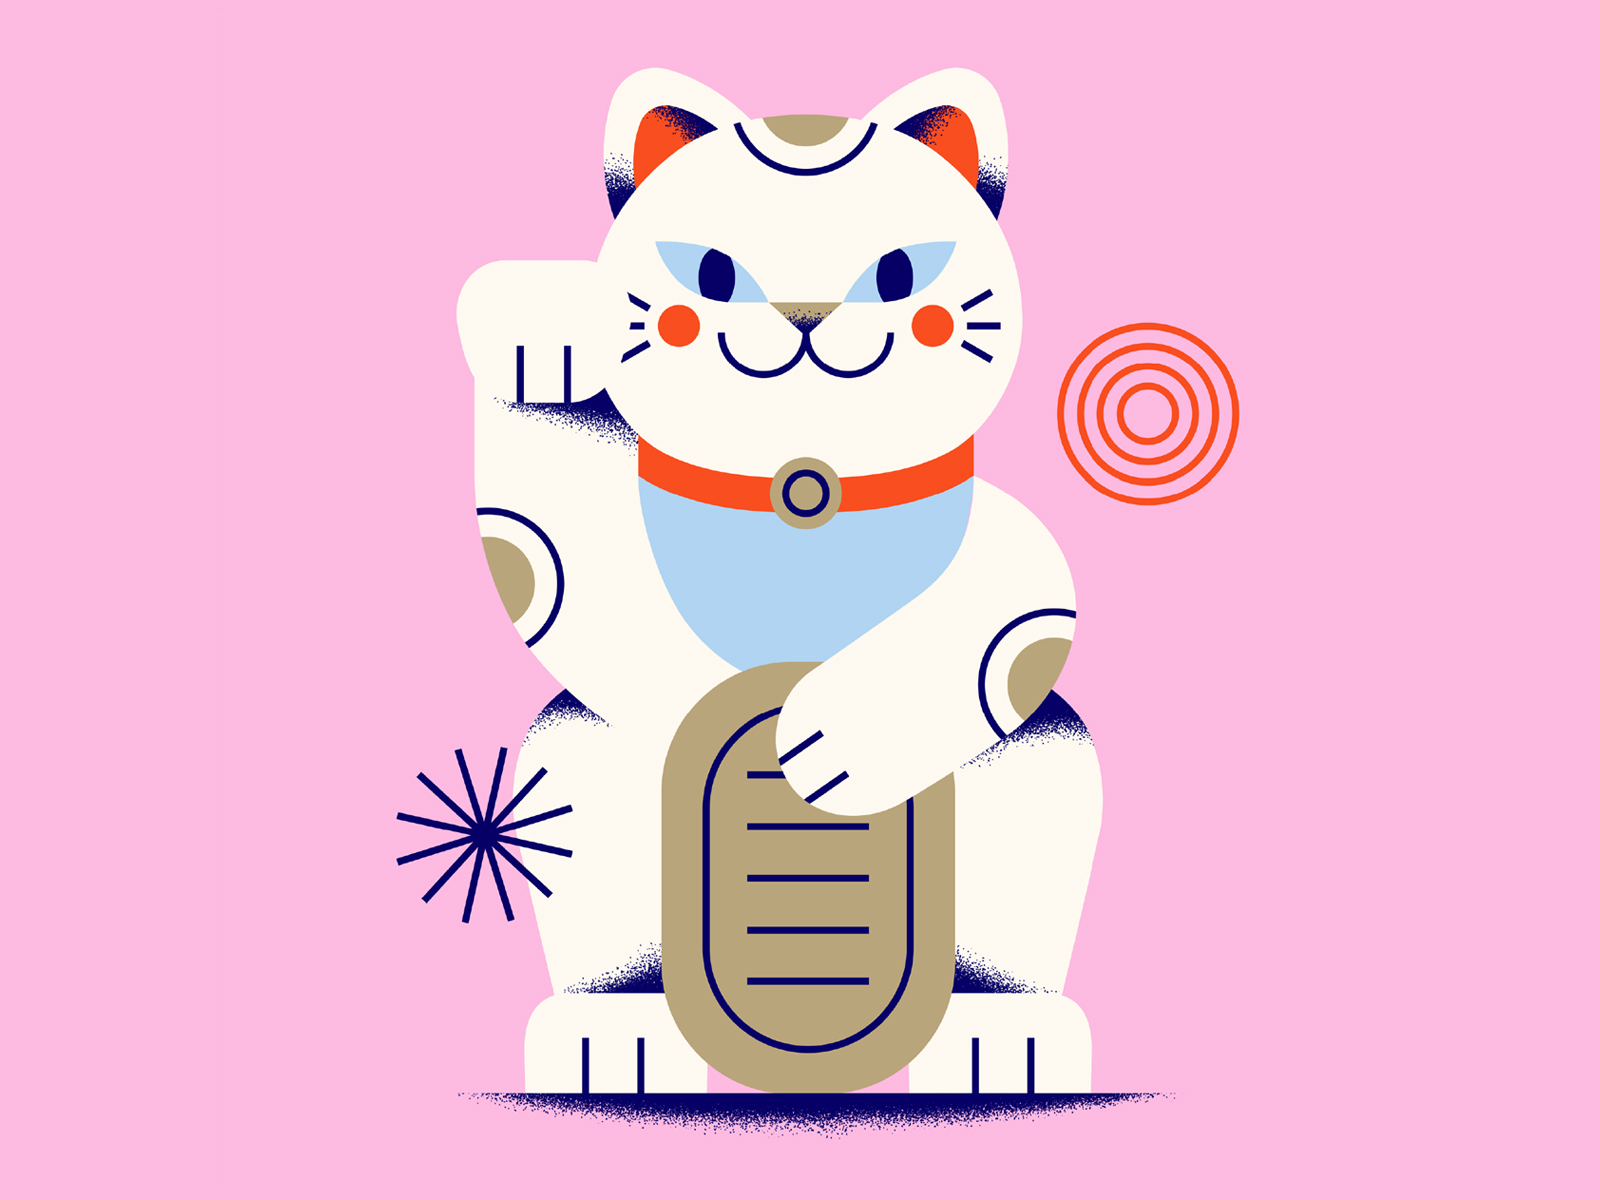 GoDaddy AAPI Graphic Pack: Lucky Cat aapi abstract animal asian blue cat coin design flat geometric icon illustration lucky minimal money pink simple texture vector